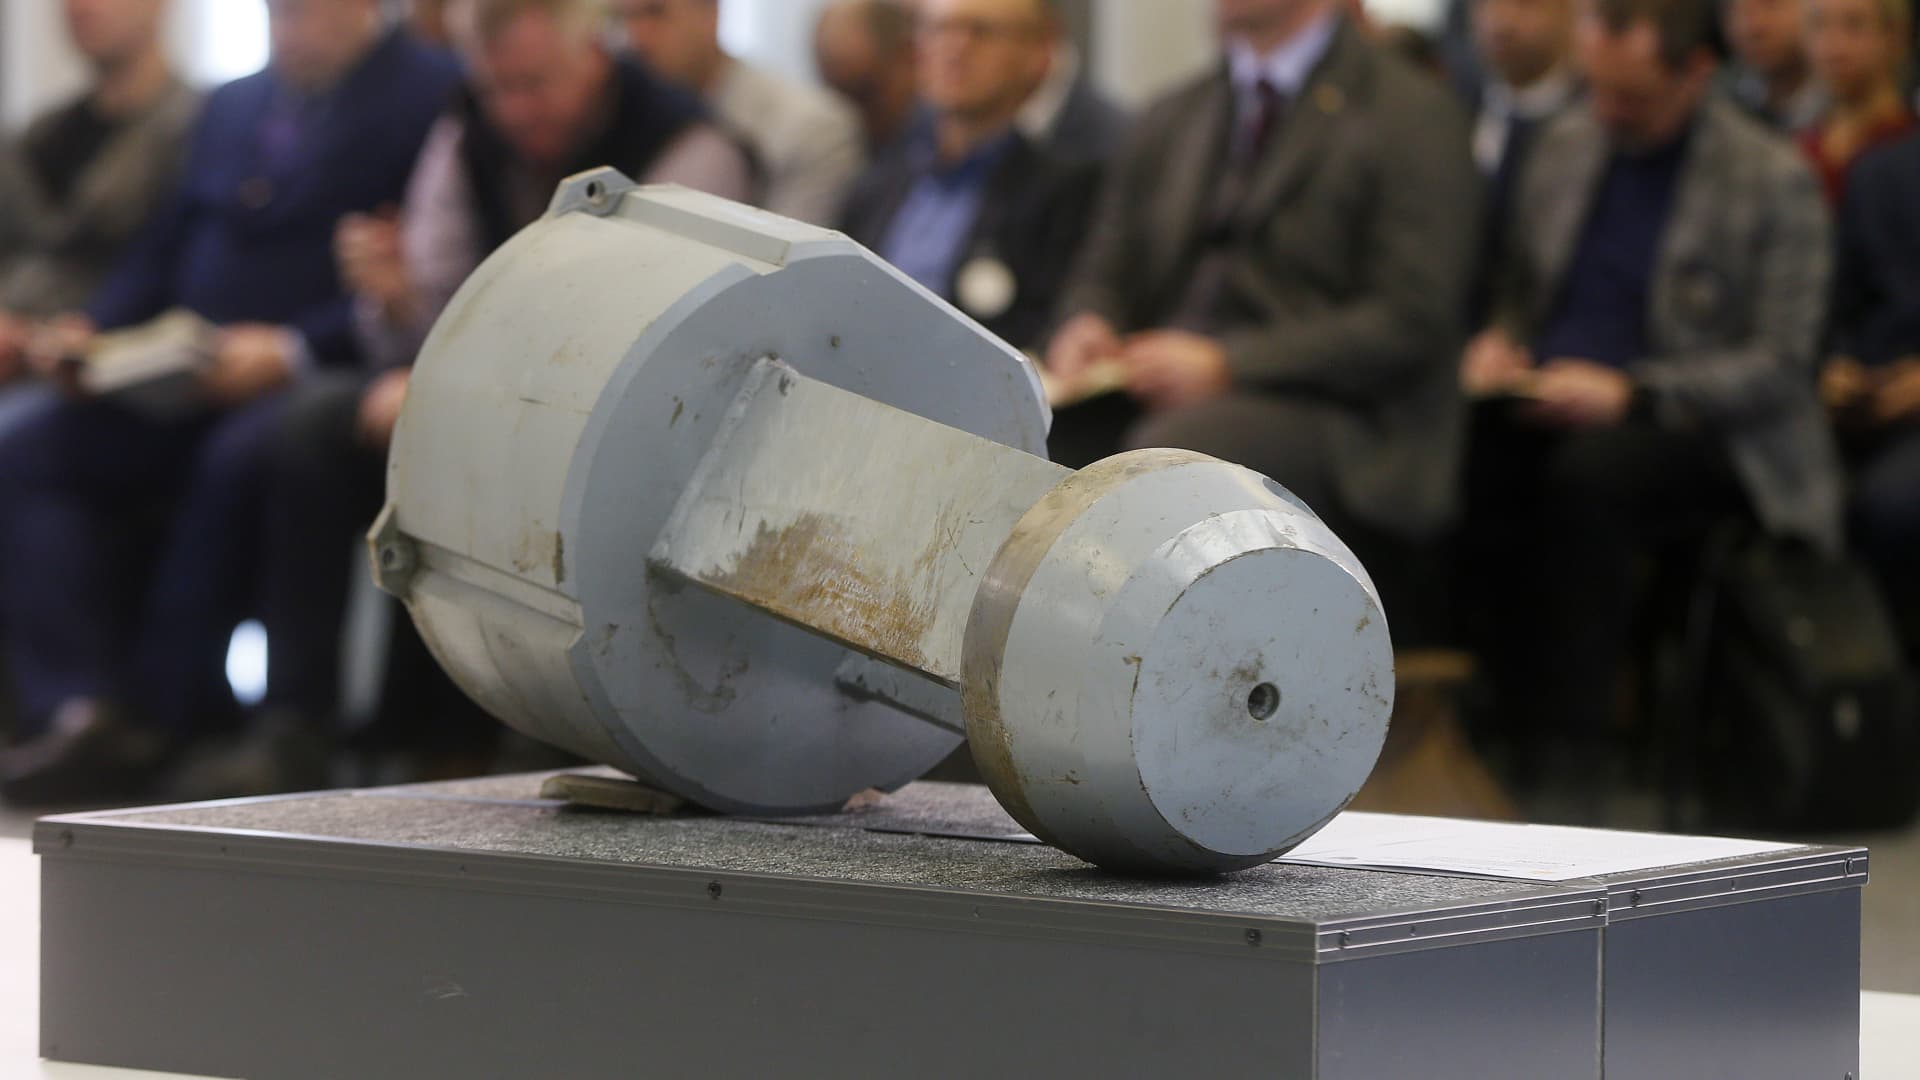 A dud warhead imitating a nuclear part of a Kh-55SM strategic cruise missile, which was used by Russian troops during a recent missile attacks on Ukraine, is seen during a media briefing in Kyiv, Ukraine 01 December 2022.